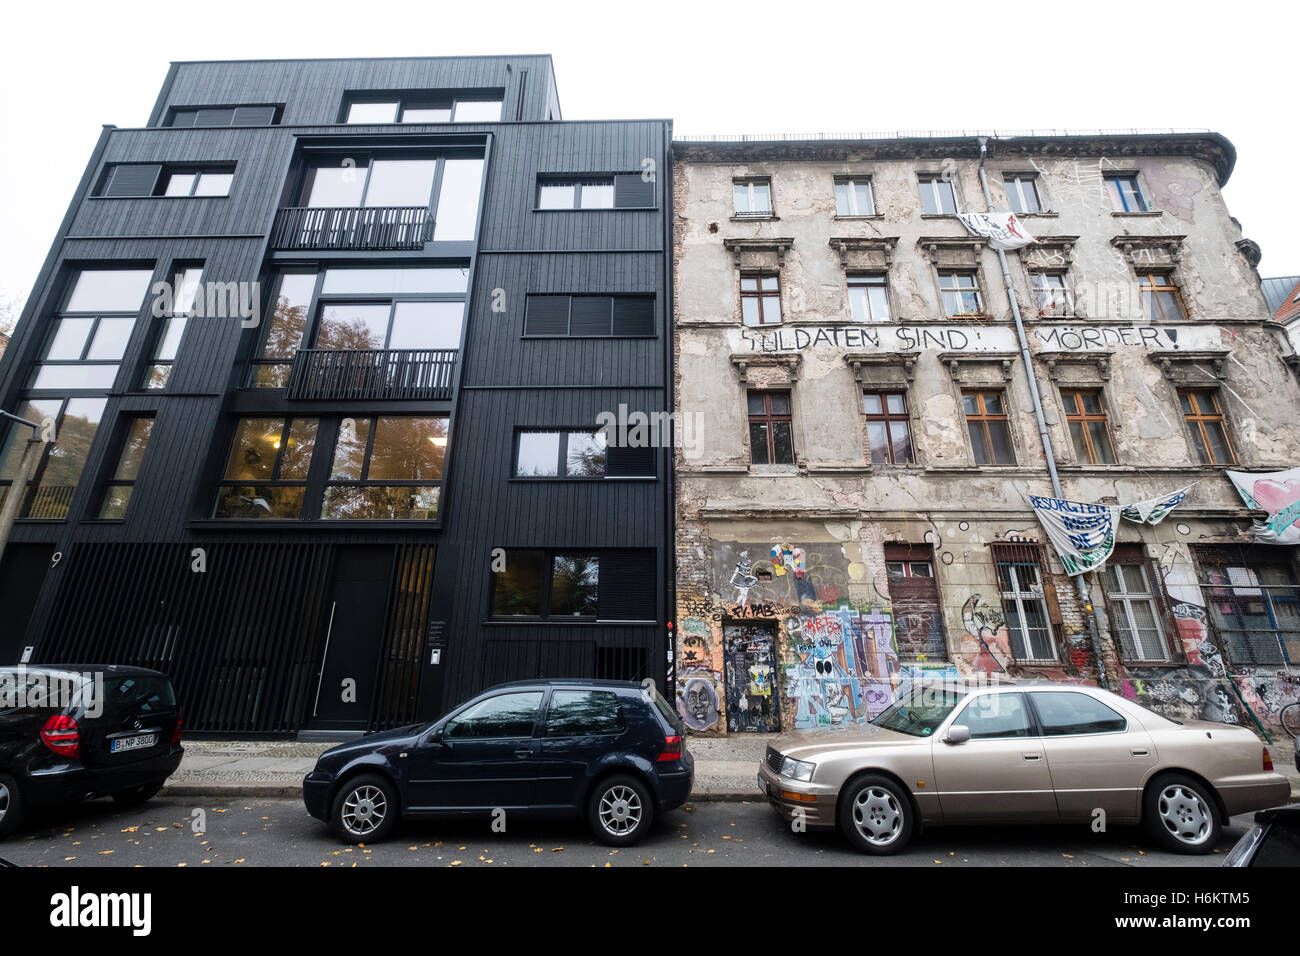 Contrast between modern office building and old apartment building used as a squat in Mitte Berlin Germany Stock Photo